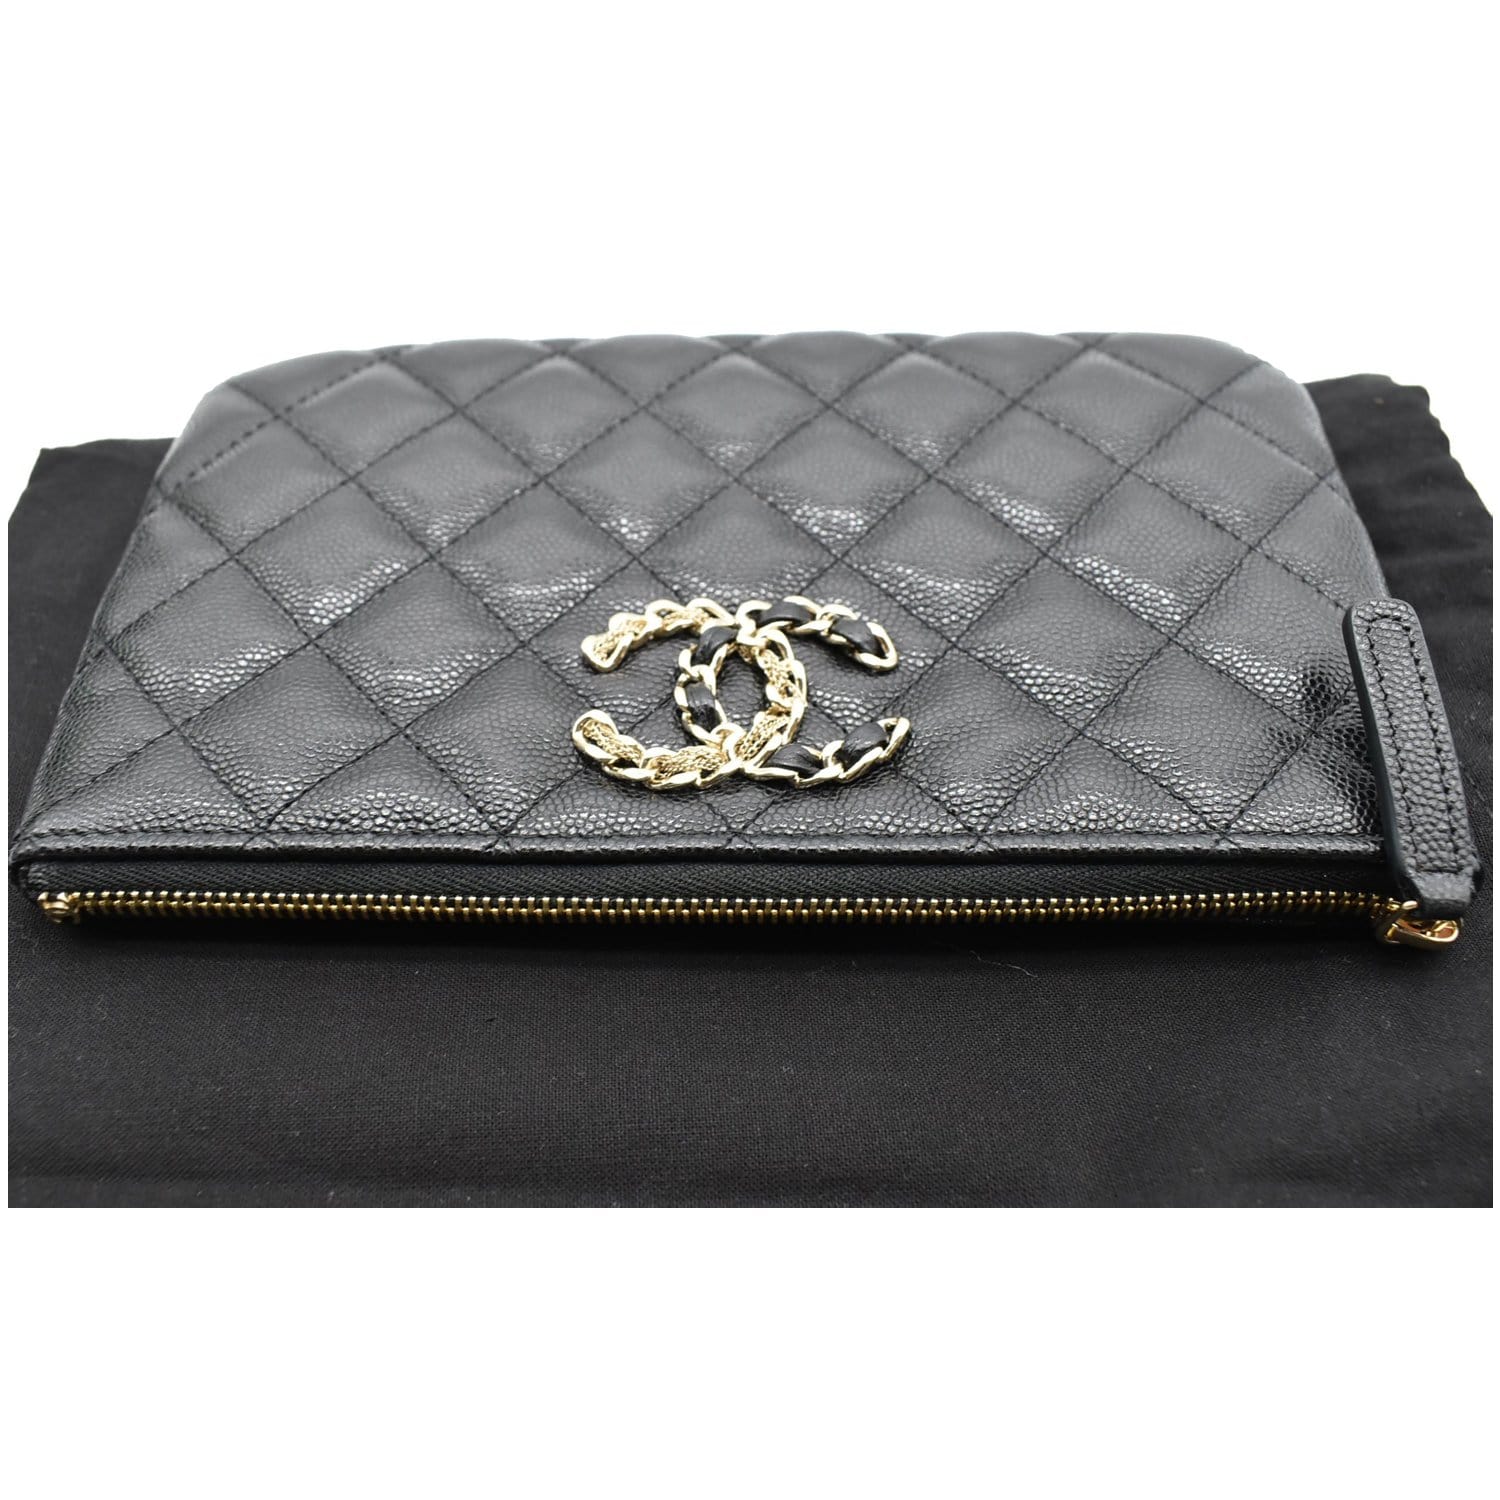 CHANEL, Bags, Chanel Black Quilted Lambskin Leather French Purse Wallet